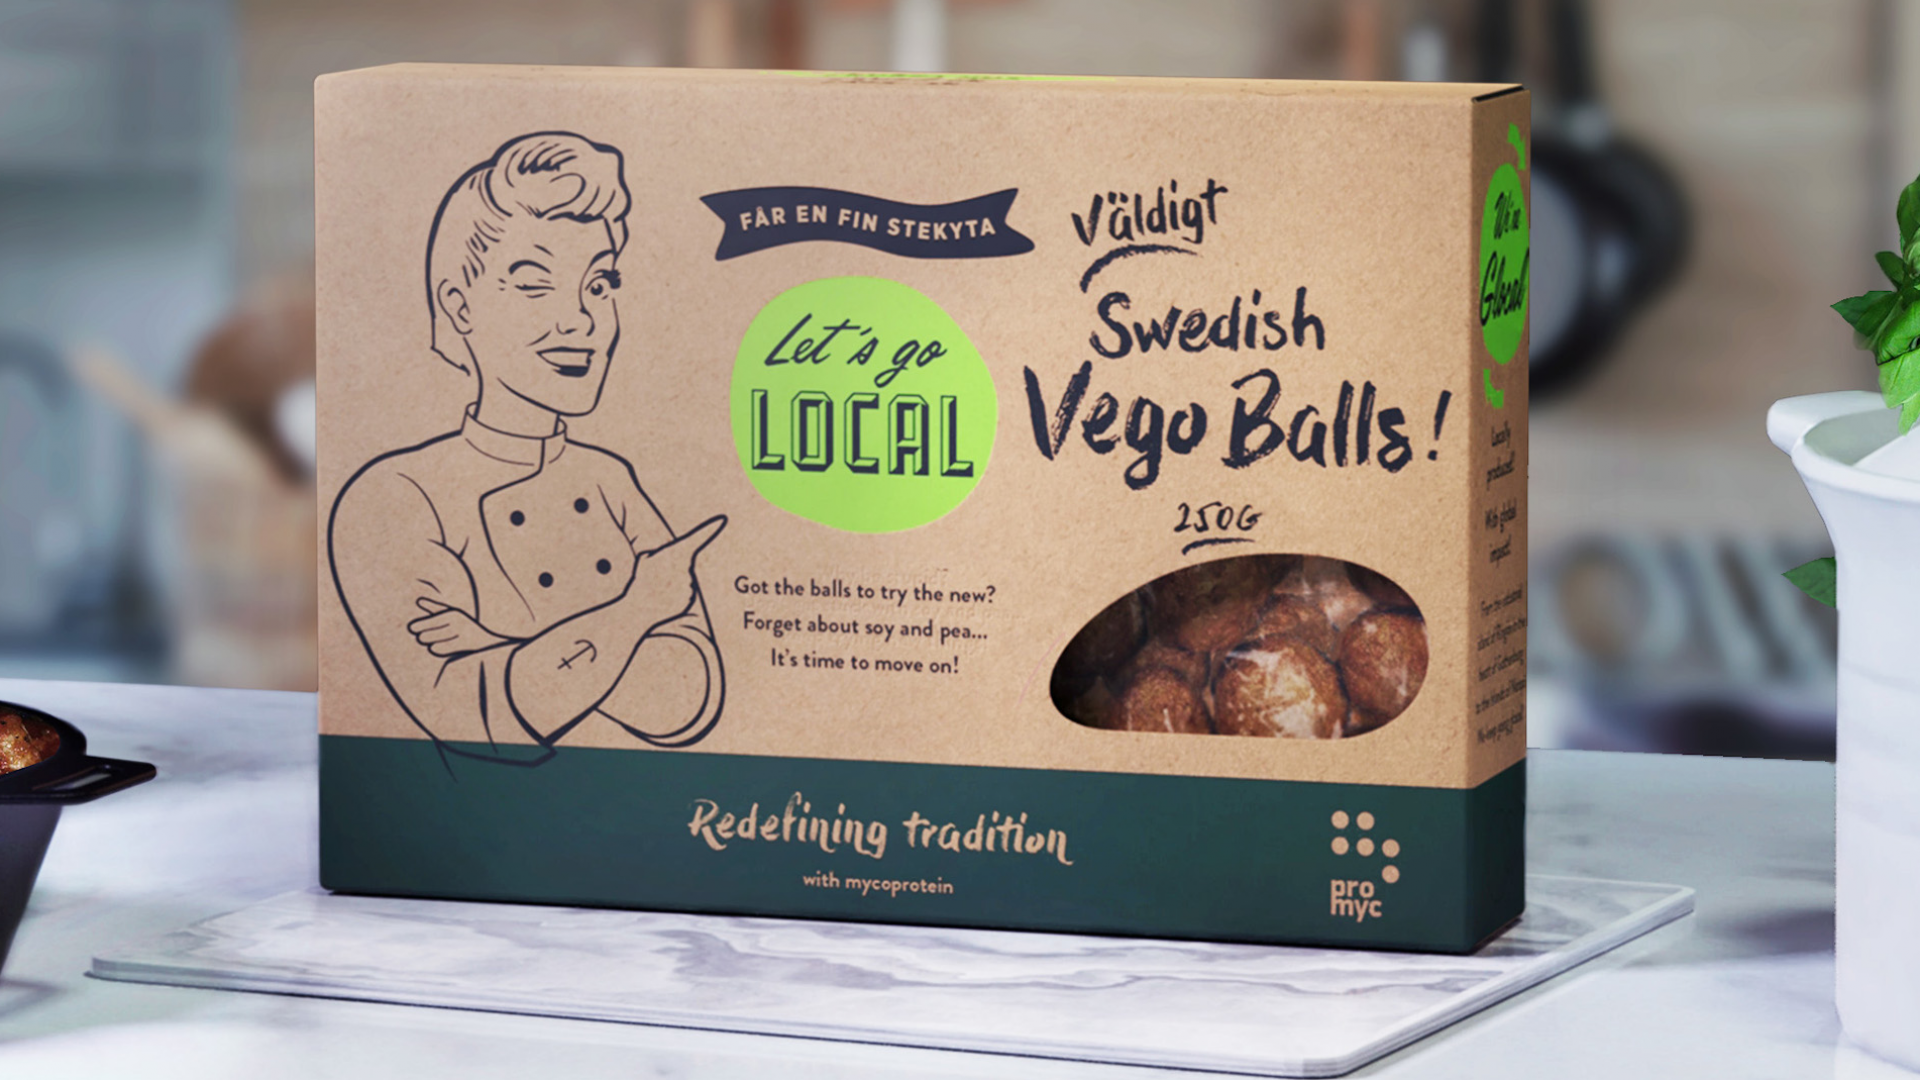 Redefining the Classic with our Sold Out “Väldigt Swedish Vego Balls”